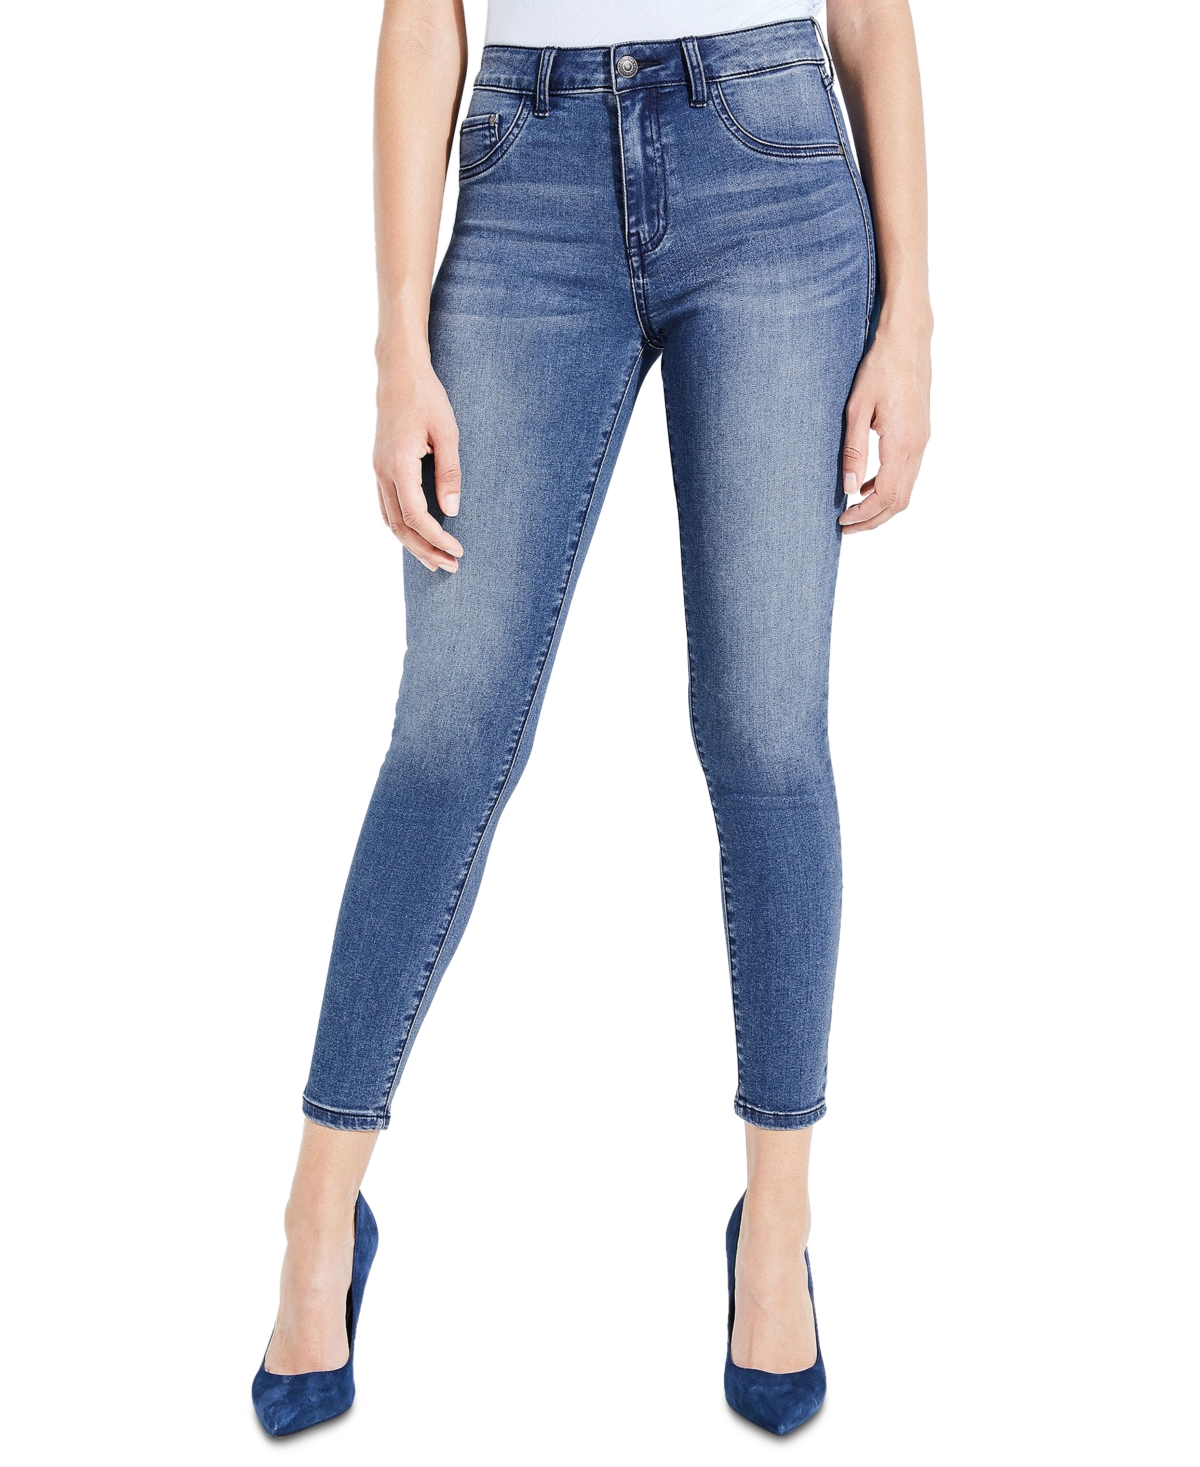  Guess 1981 Ankle Jegging Jeans